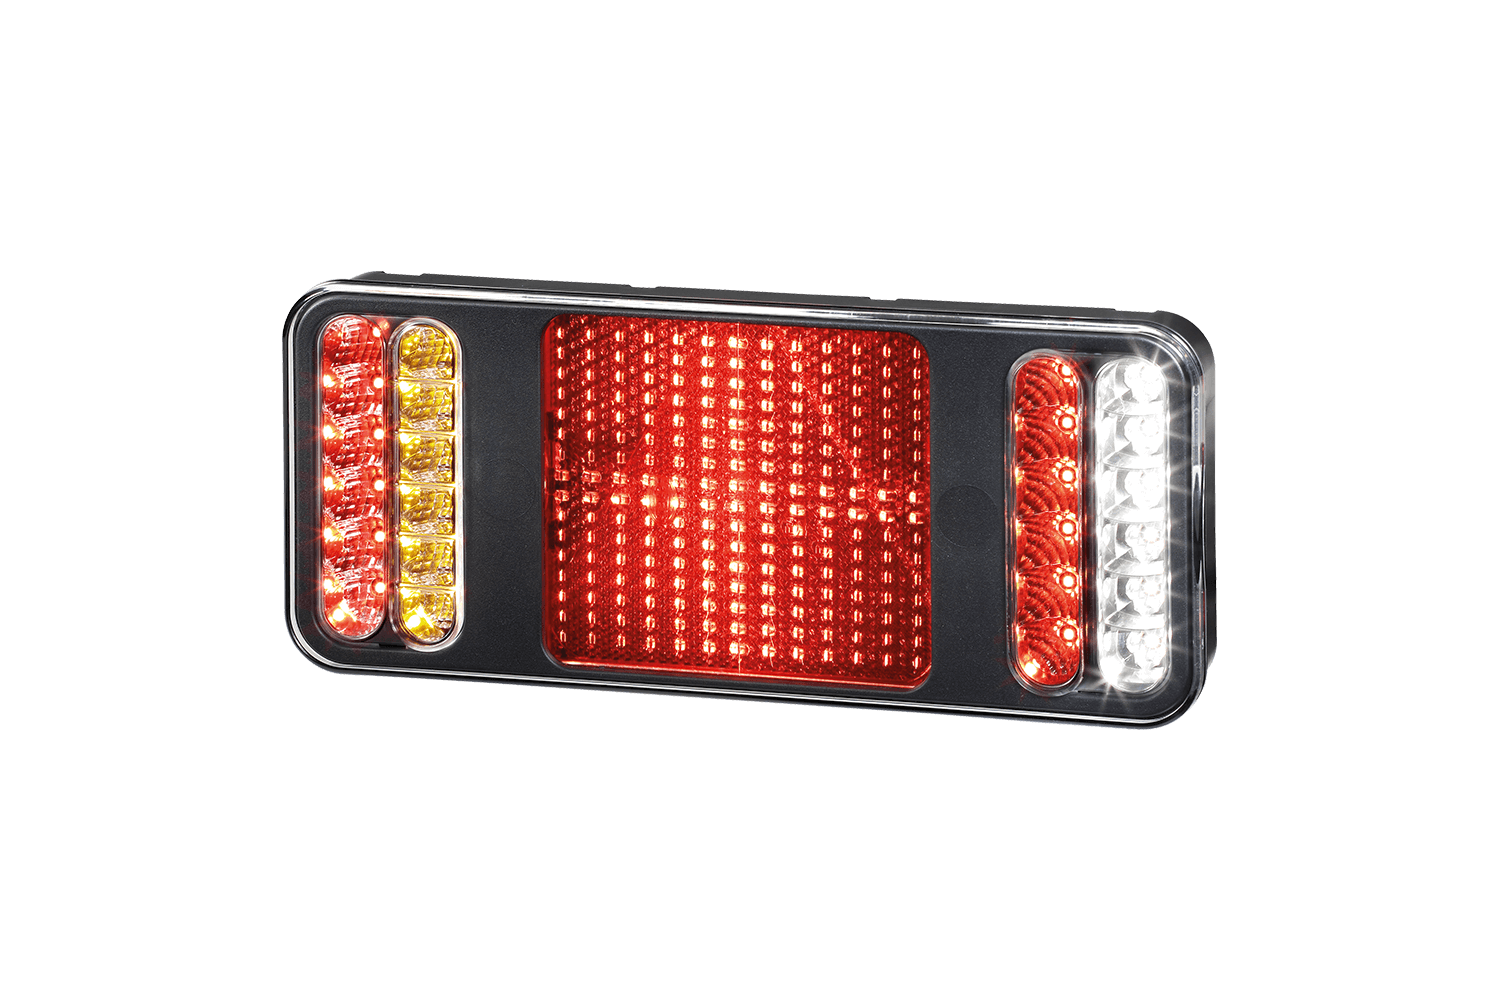 Coluna Full-LED rear lamp, multi-function lamp from Hella offered by Patlon